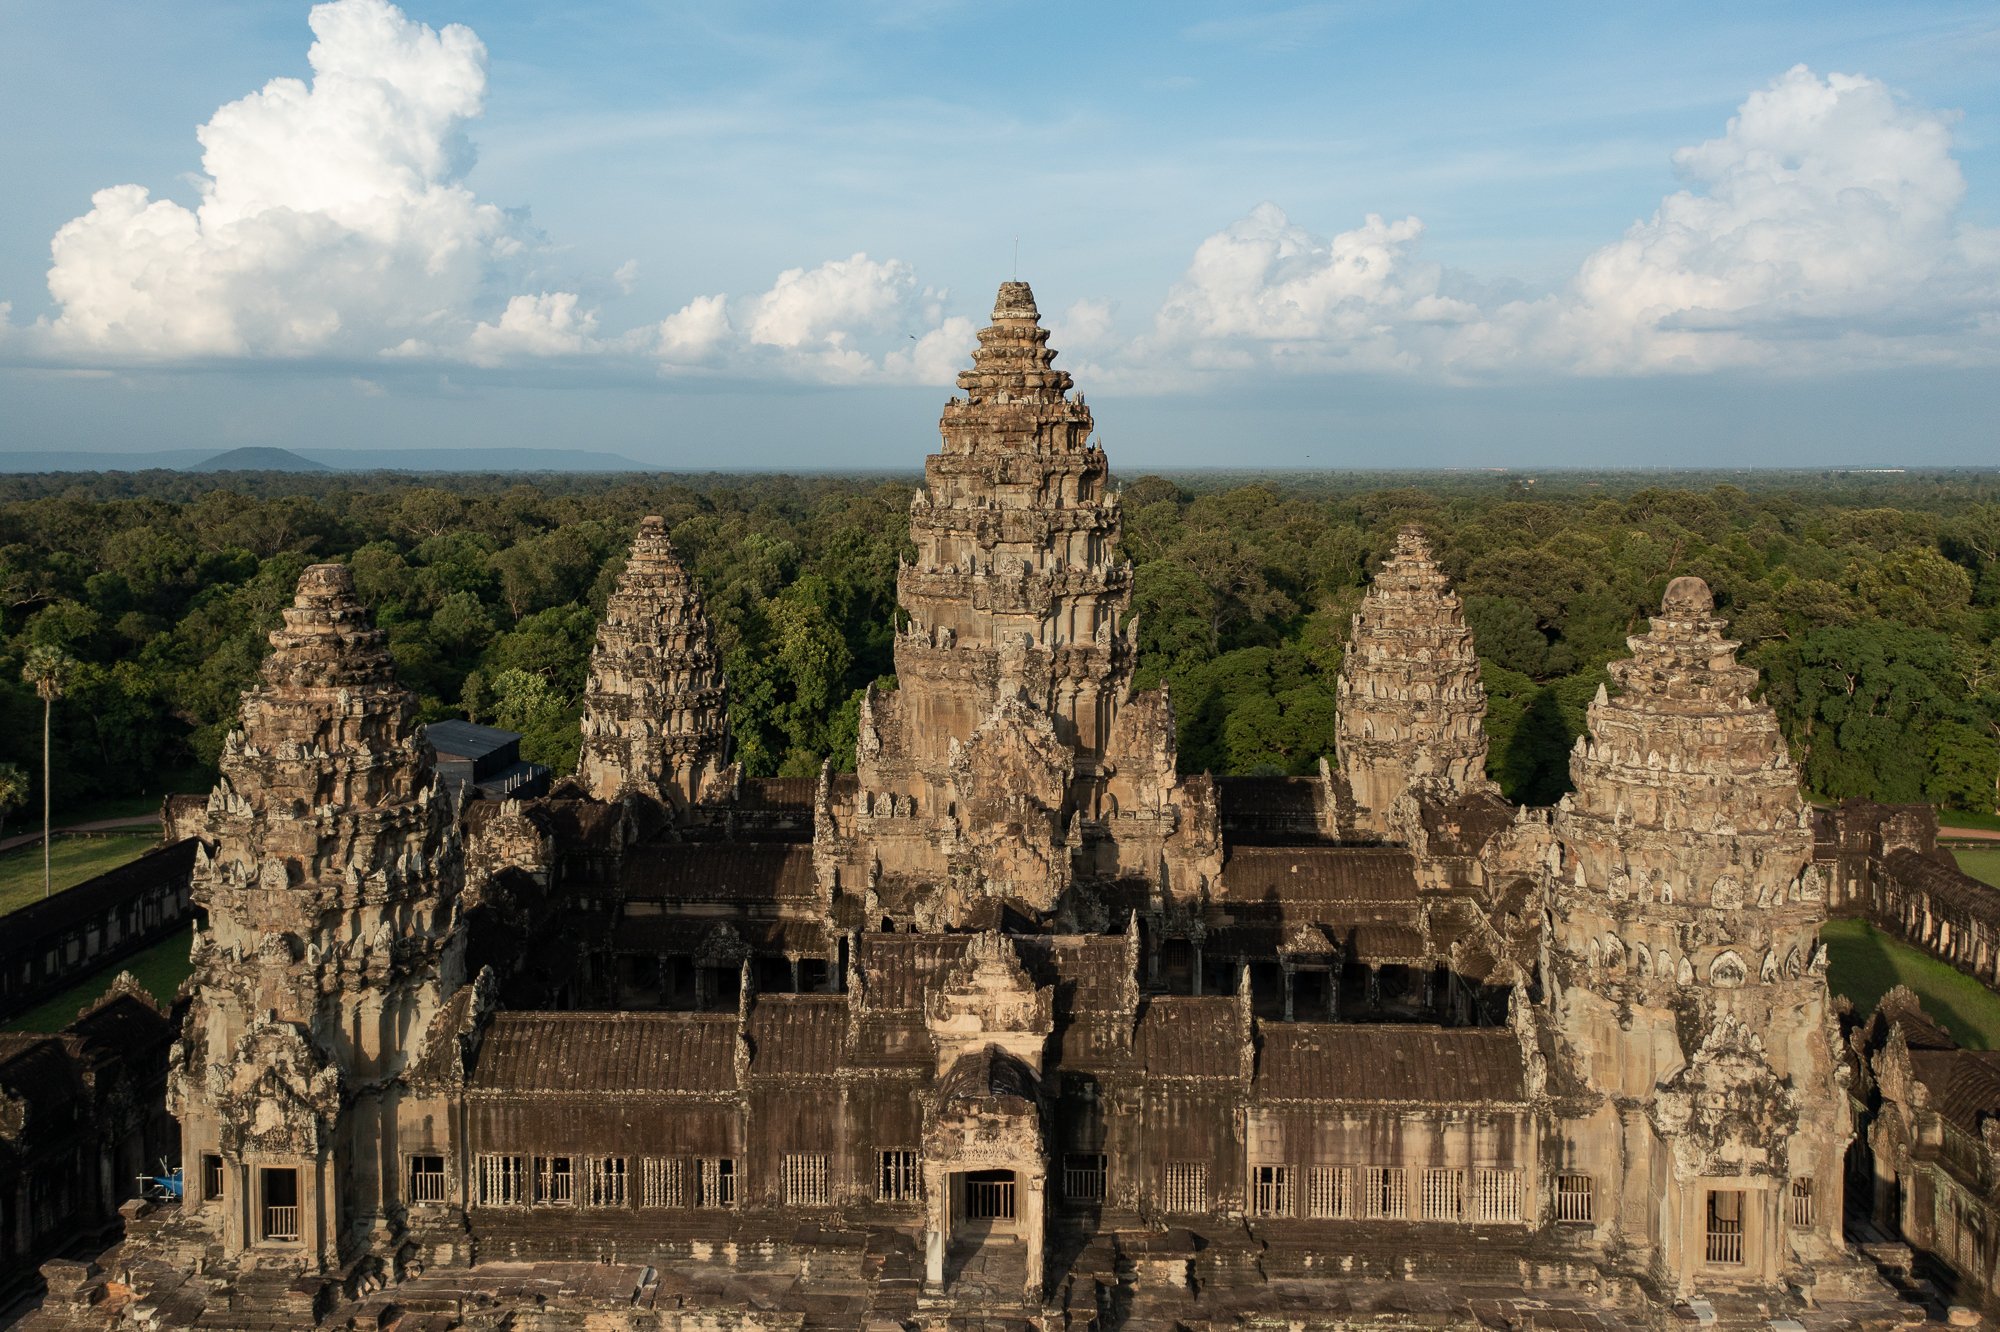 Drone photograph of Angkor Wat, Cambodia. Taken while working as a drone pilot for CNN 